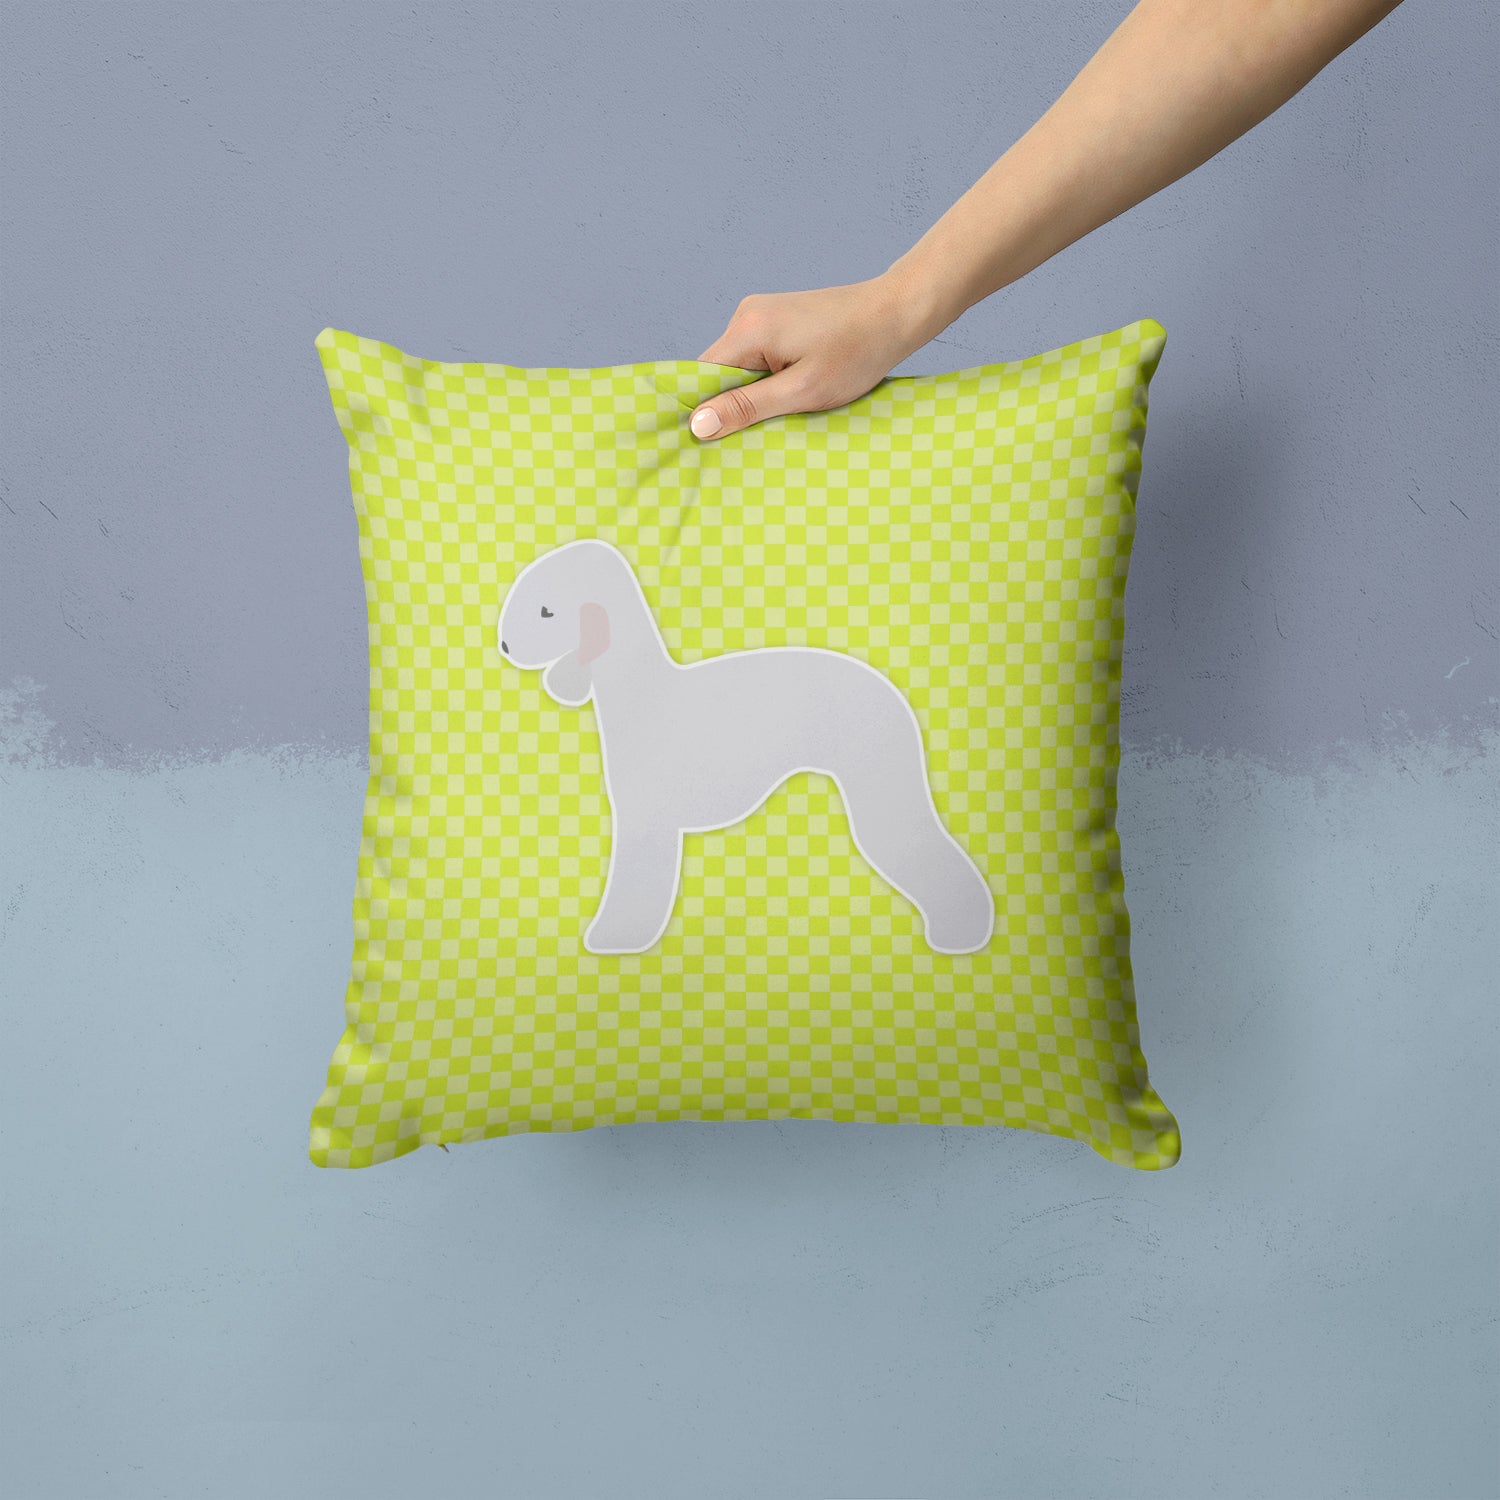 Bedlington Terrier Checkerboard Green Fabric Decorative Pillow BB3794PW1414 - the-store.com